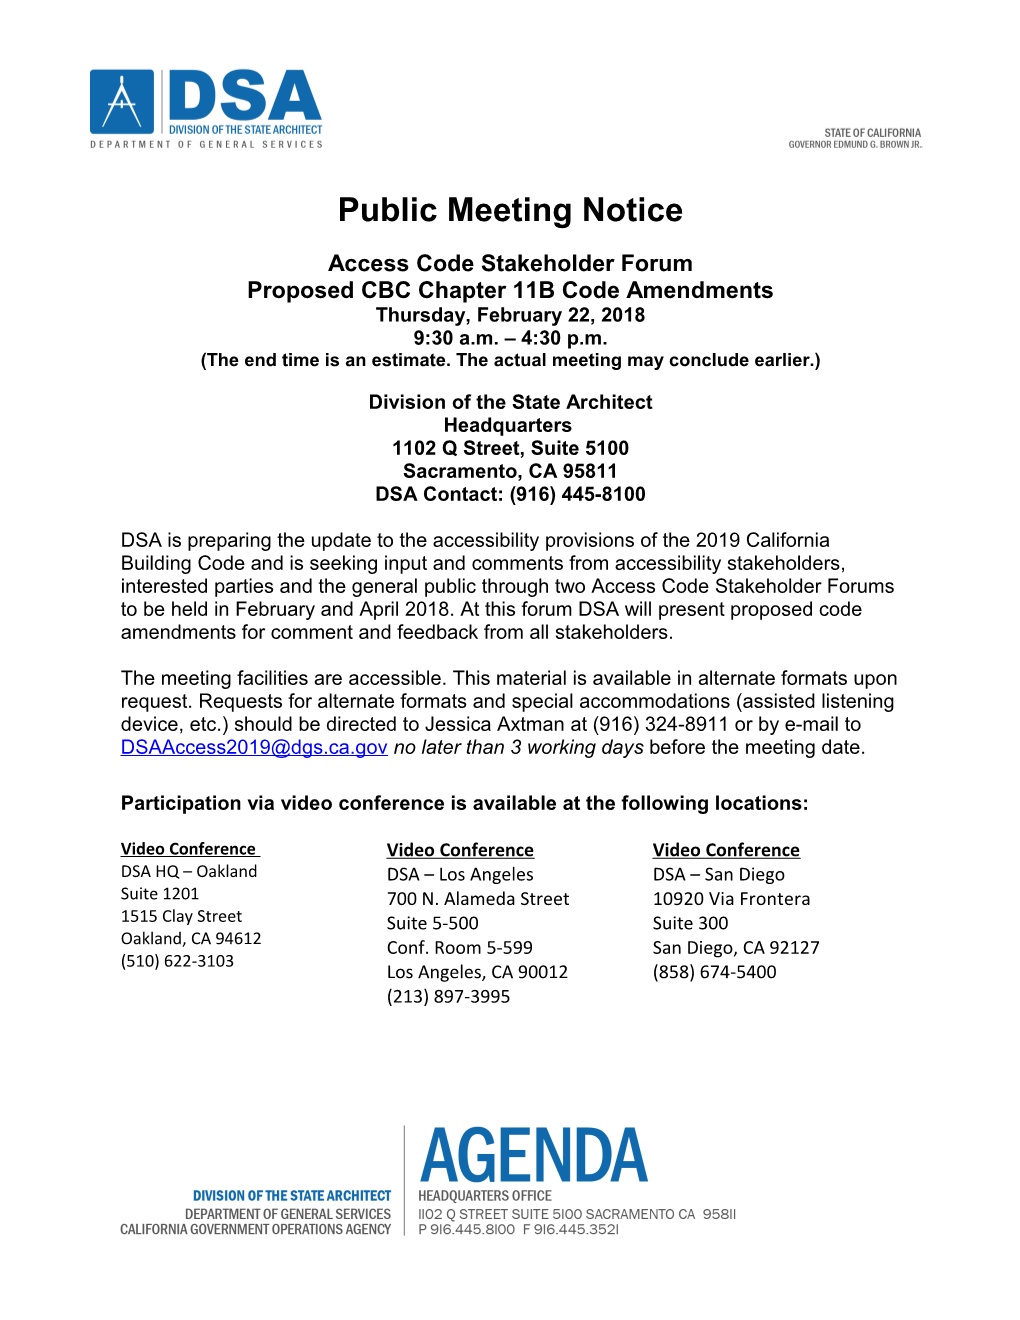 Public Meeting Notice: Access Code Update Stakeholder Forum, February 22, 2018